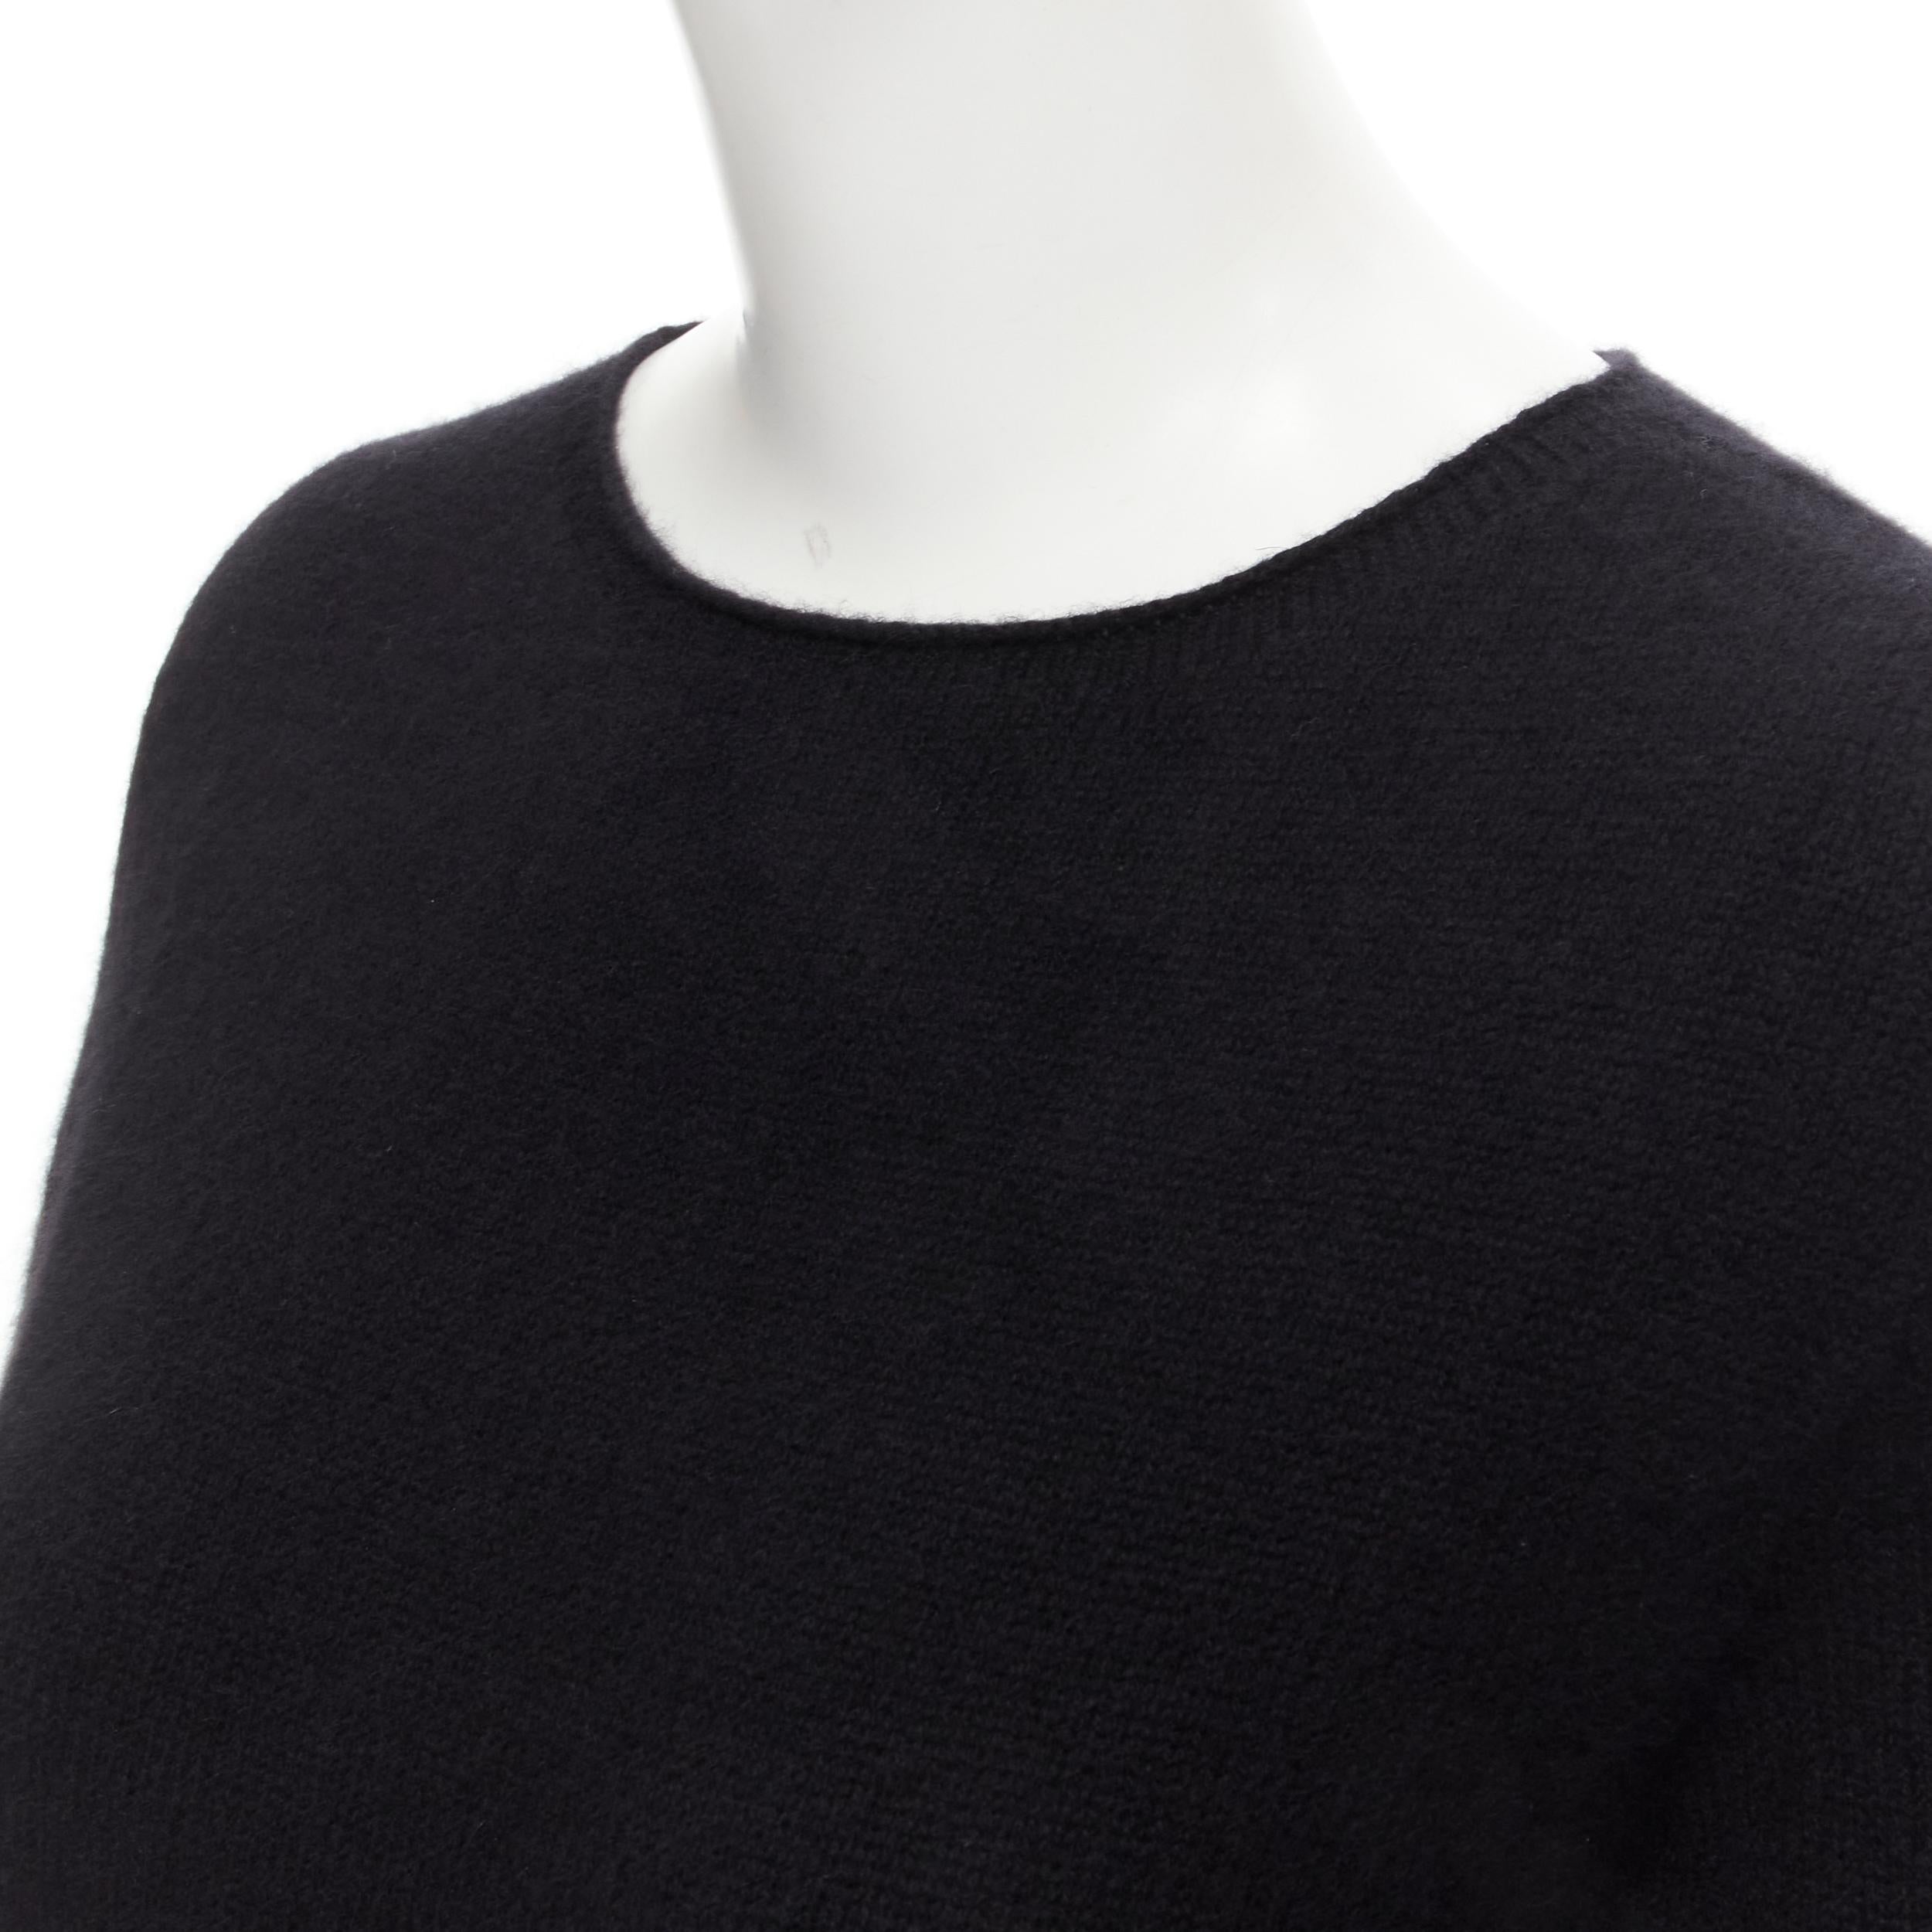 THW ROW black round neck short sleeve flared tunic sweater top XS 
Reference: MELK/A00032 
Brand: The Row 
Material: Wool 
Color: Black 
Pattern: Solid 
Extra Detail: Flared hem. 
Made in: USA 

CONDITION: 
Condition: Excellent, this item was